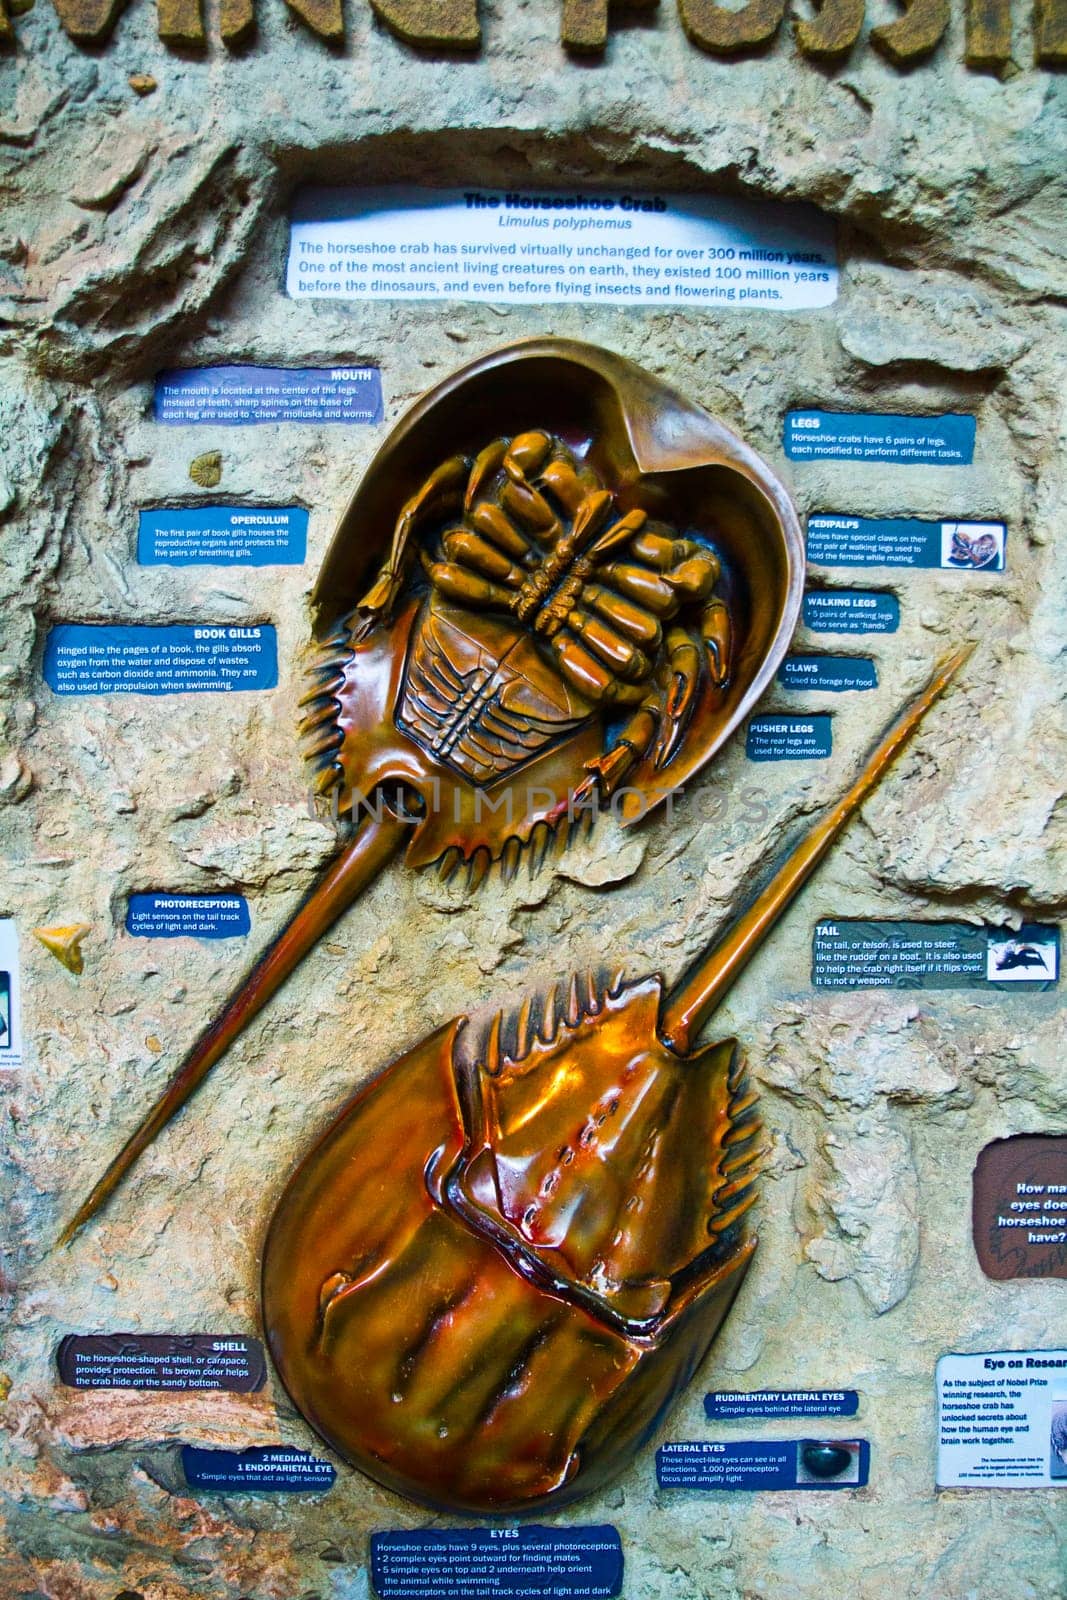 Educational exhibit at an aquarium in Gatlinburg, Tennessee showcases a detailed model of the ancient horseshoe crab, highlighting its evolutionary significance and biology.